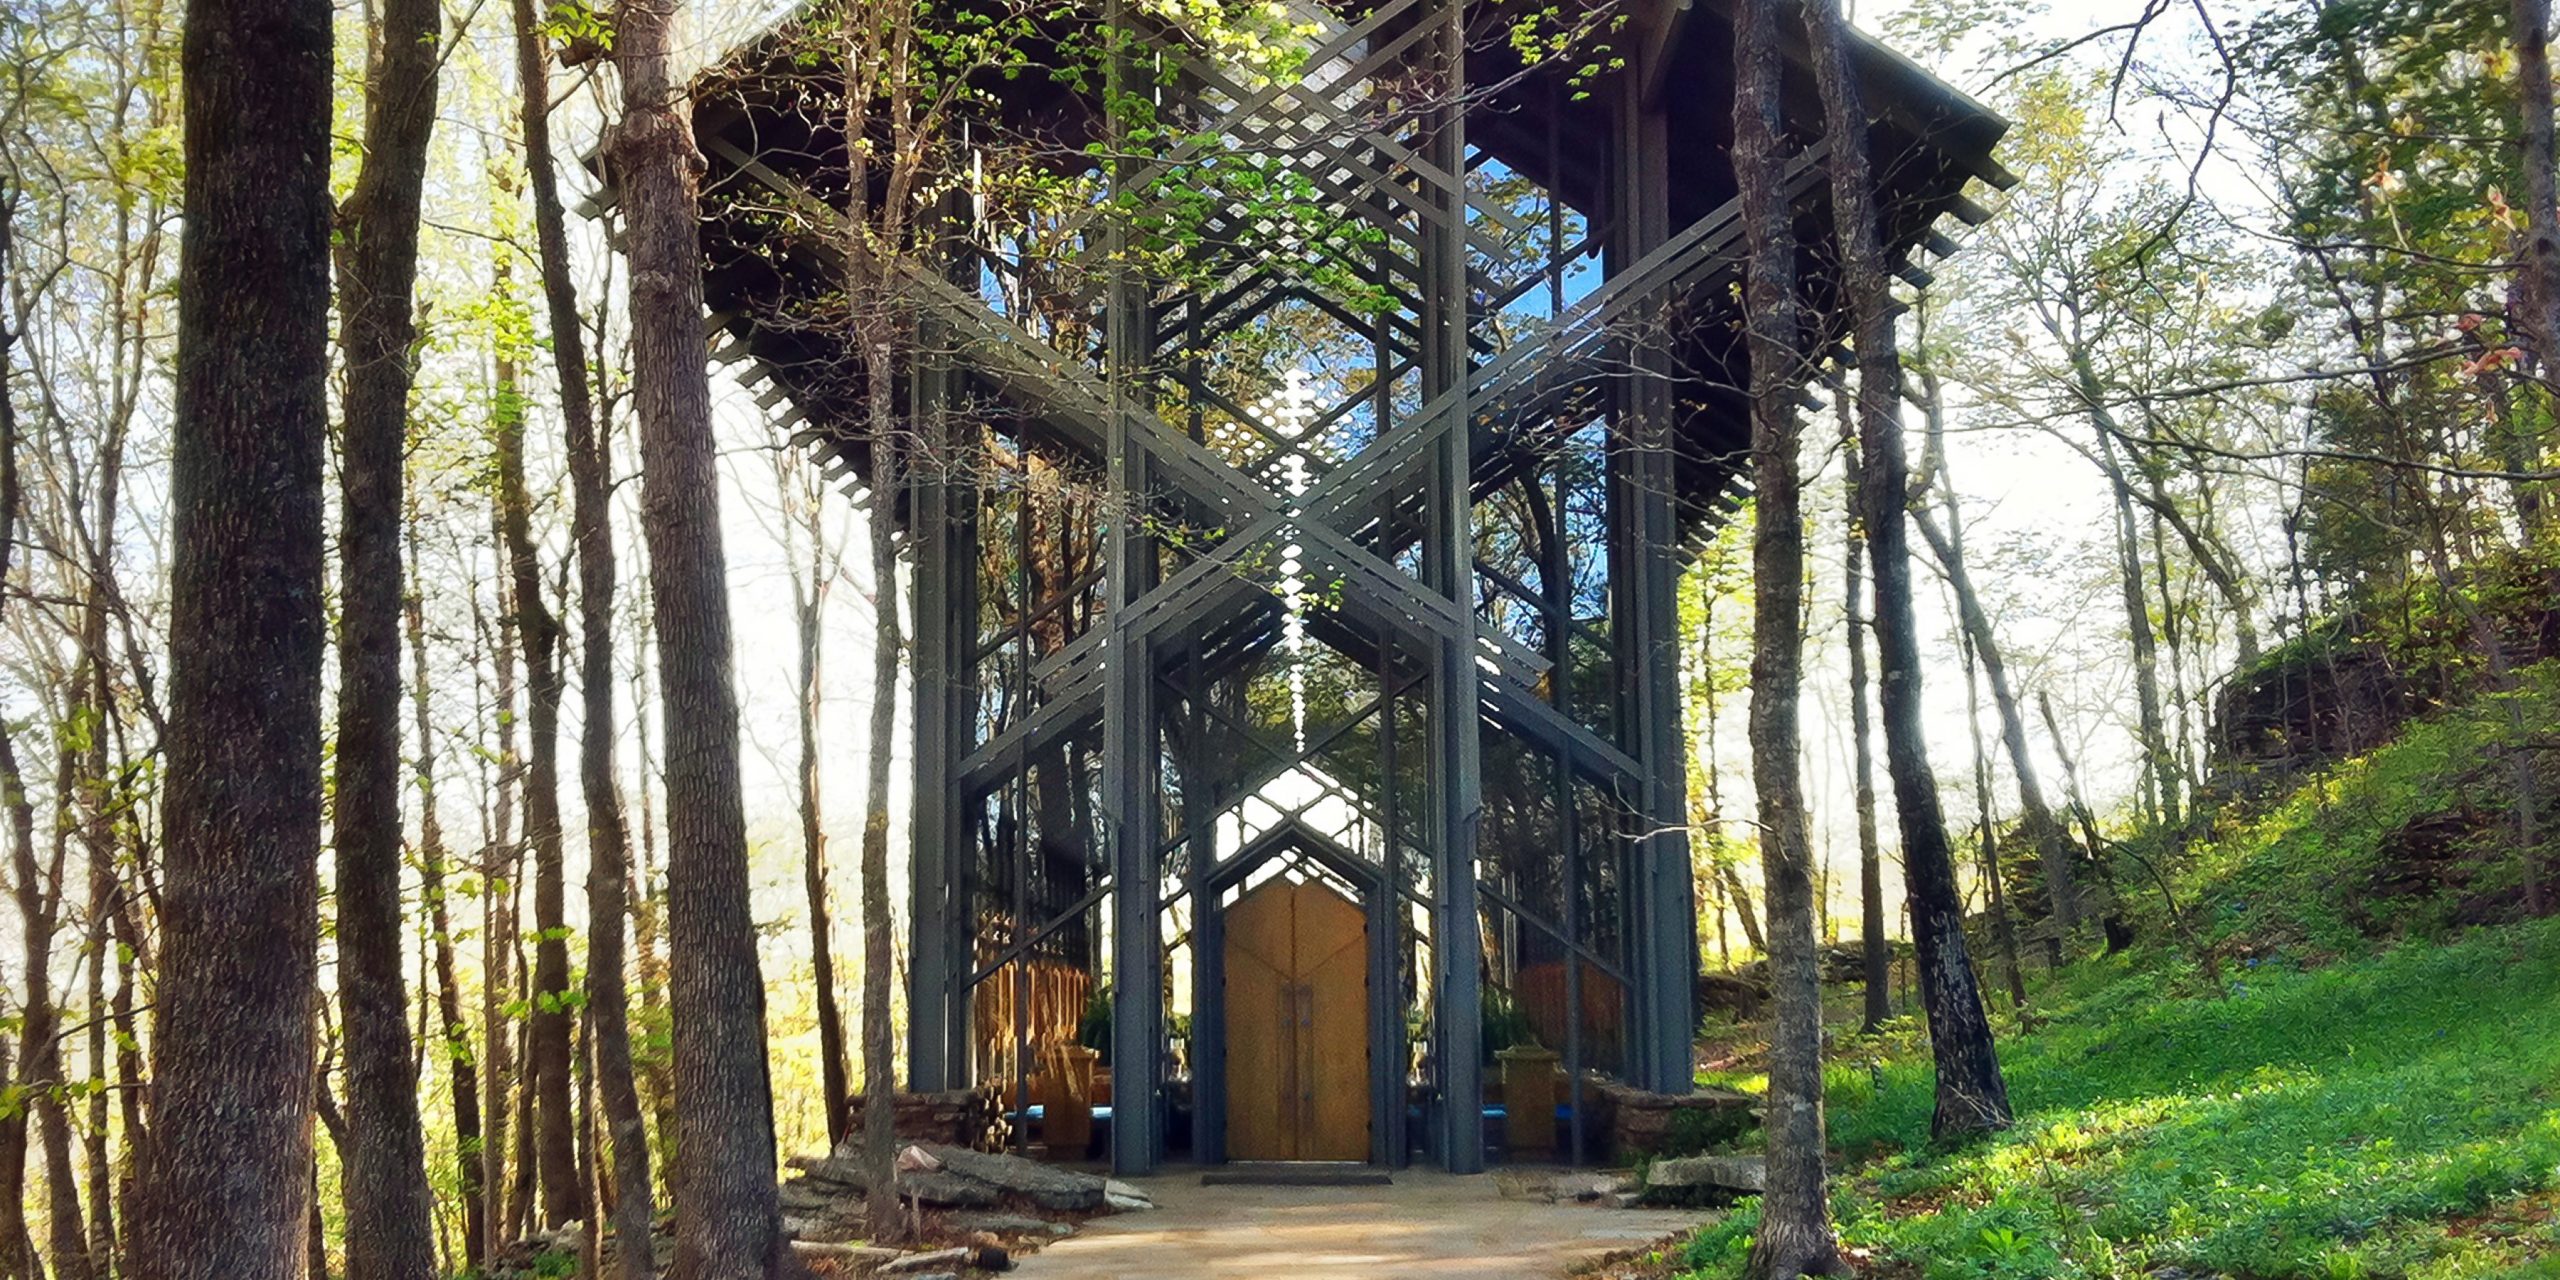 Featured image for “13 Must-Post Instagrammable Spots in Eureka Springs”